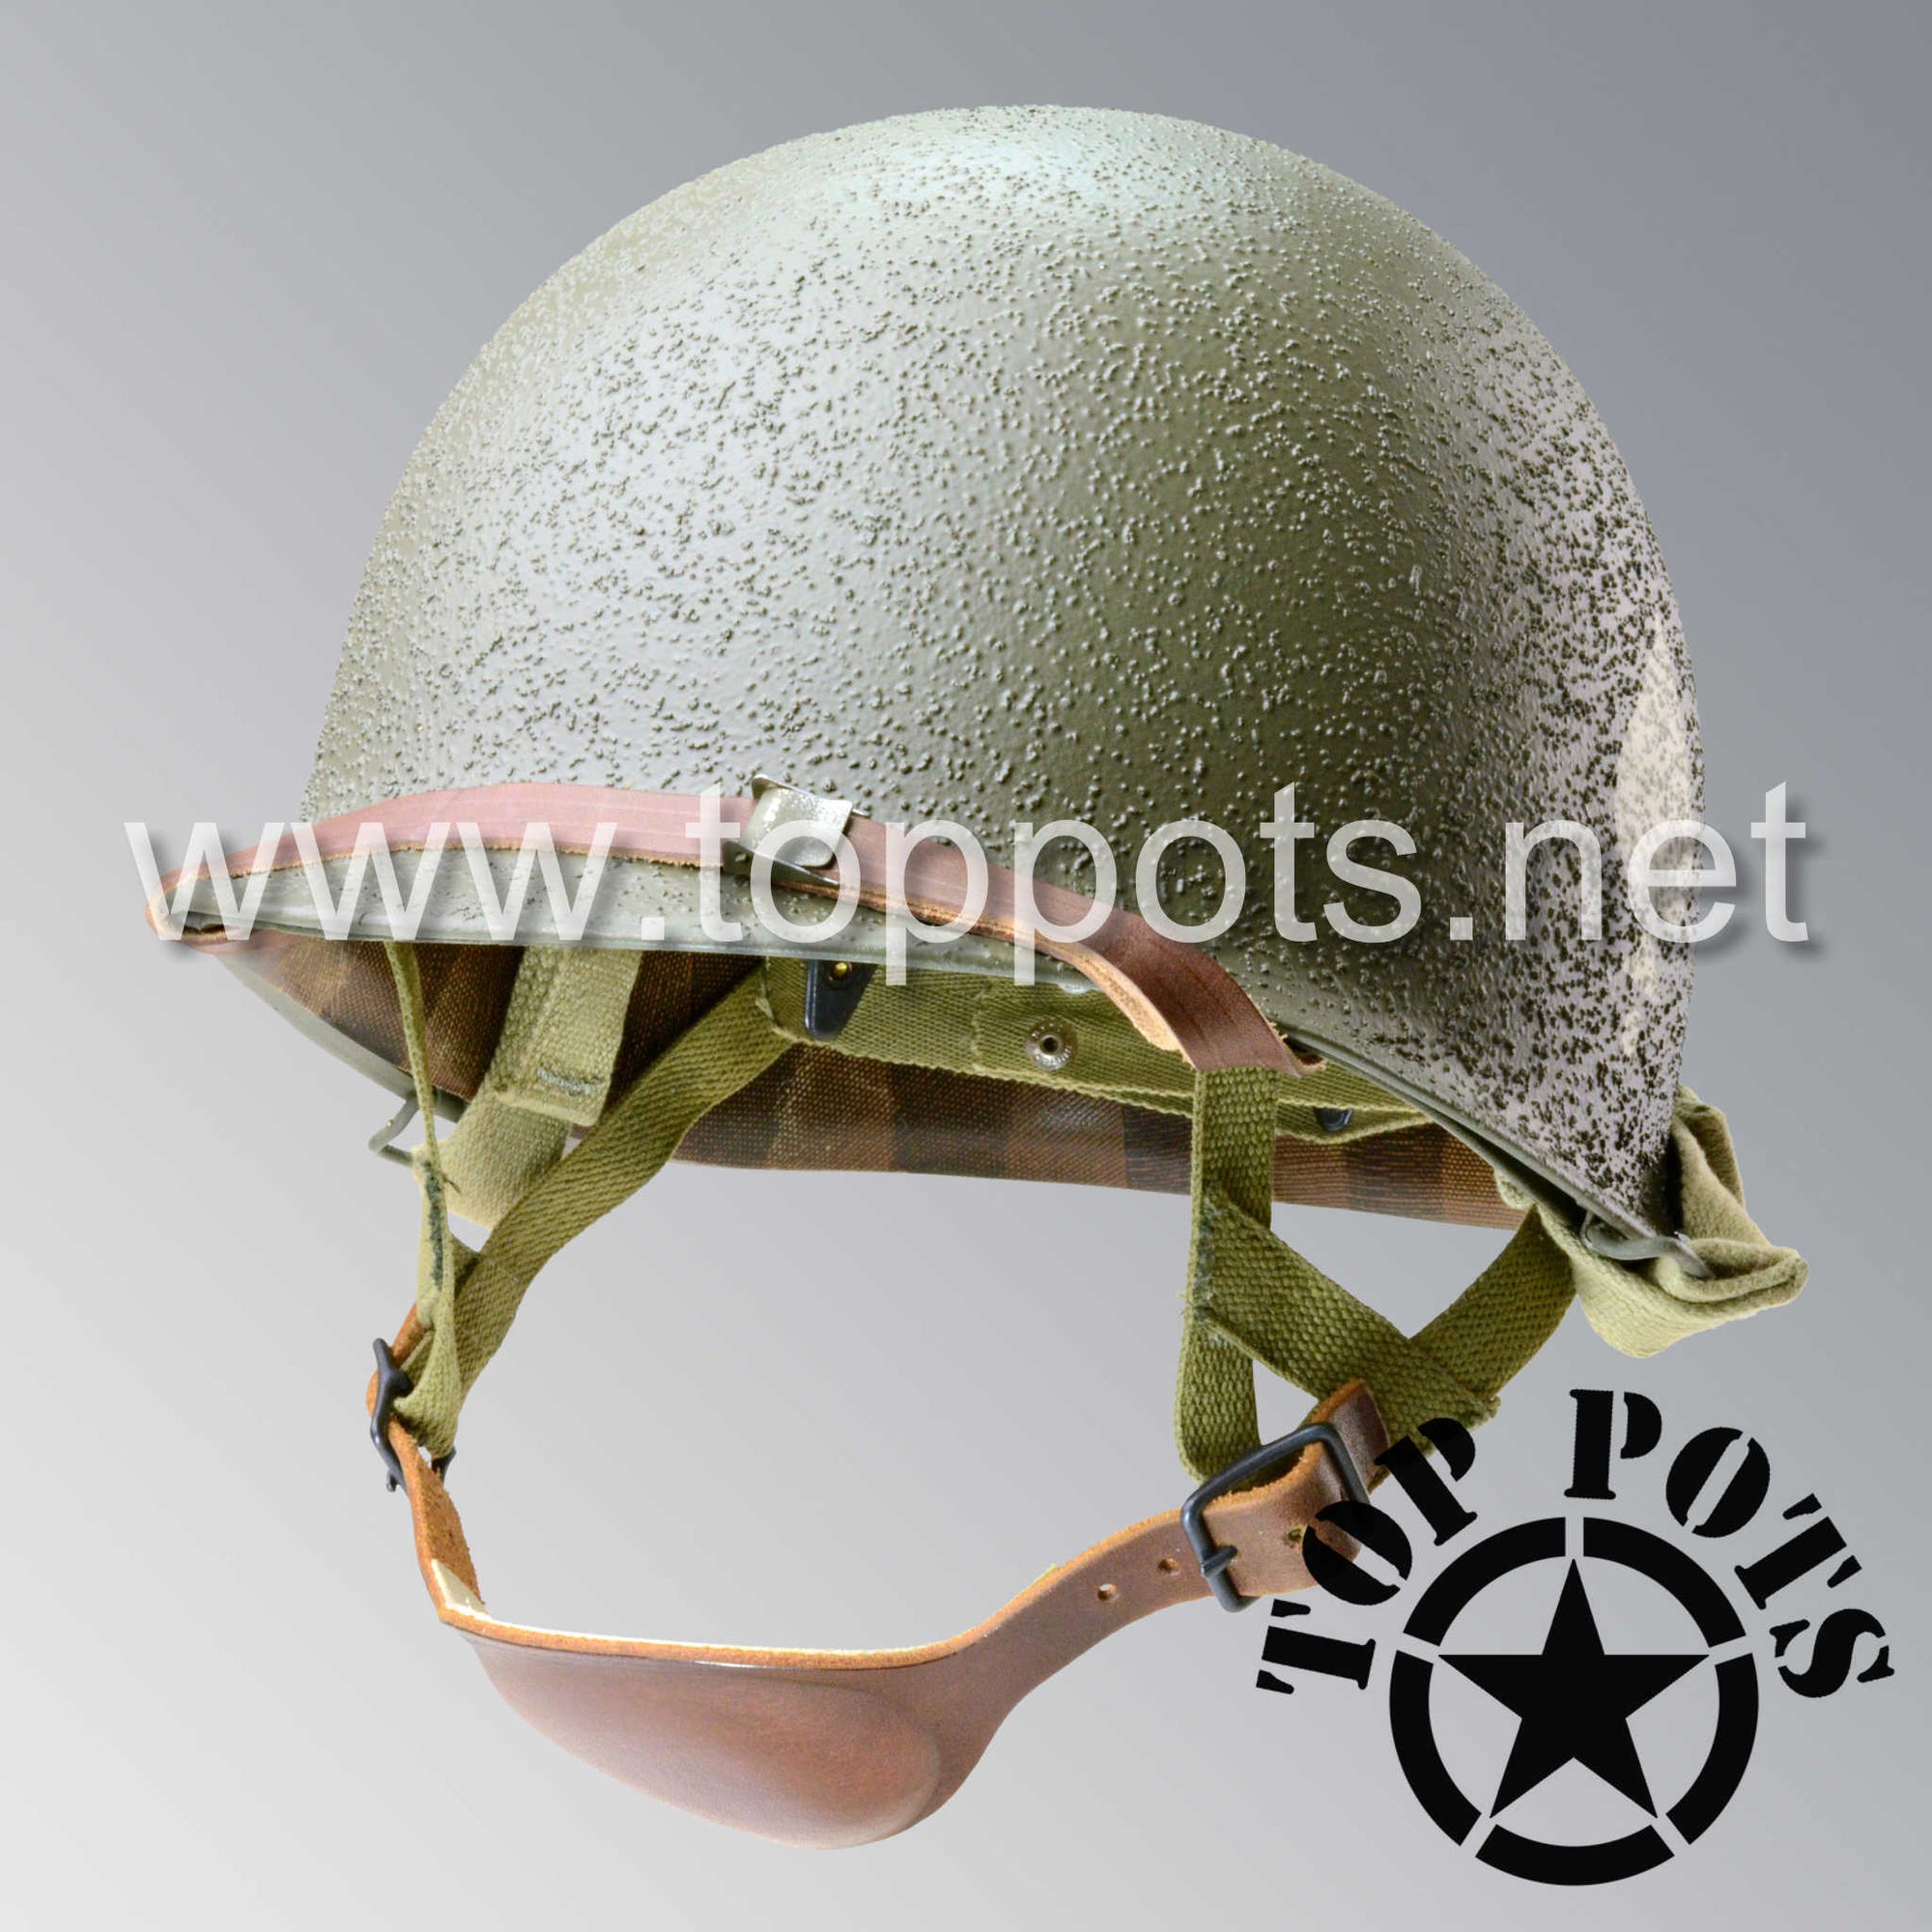 WWII US Army Restored Original M1C Paratrooper Airborne Helmet Swivel Bale Shell and Liner with 506th 2nd Battalion PIR Officer Emblem